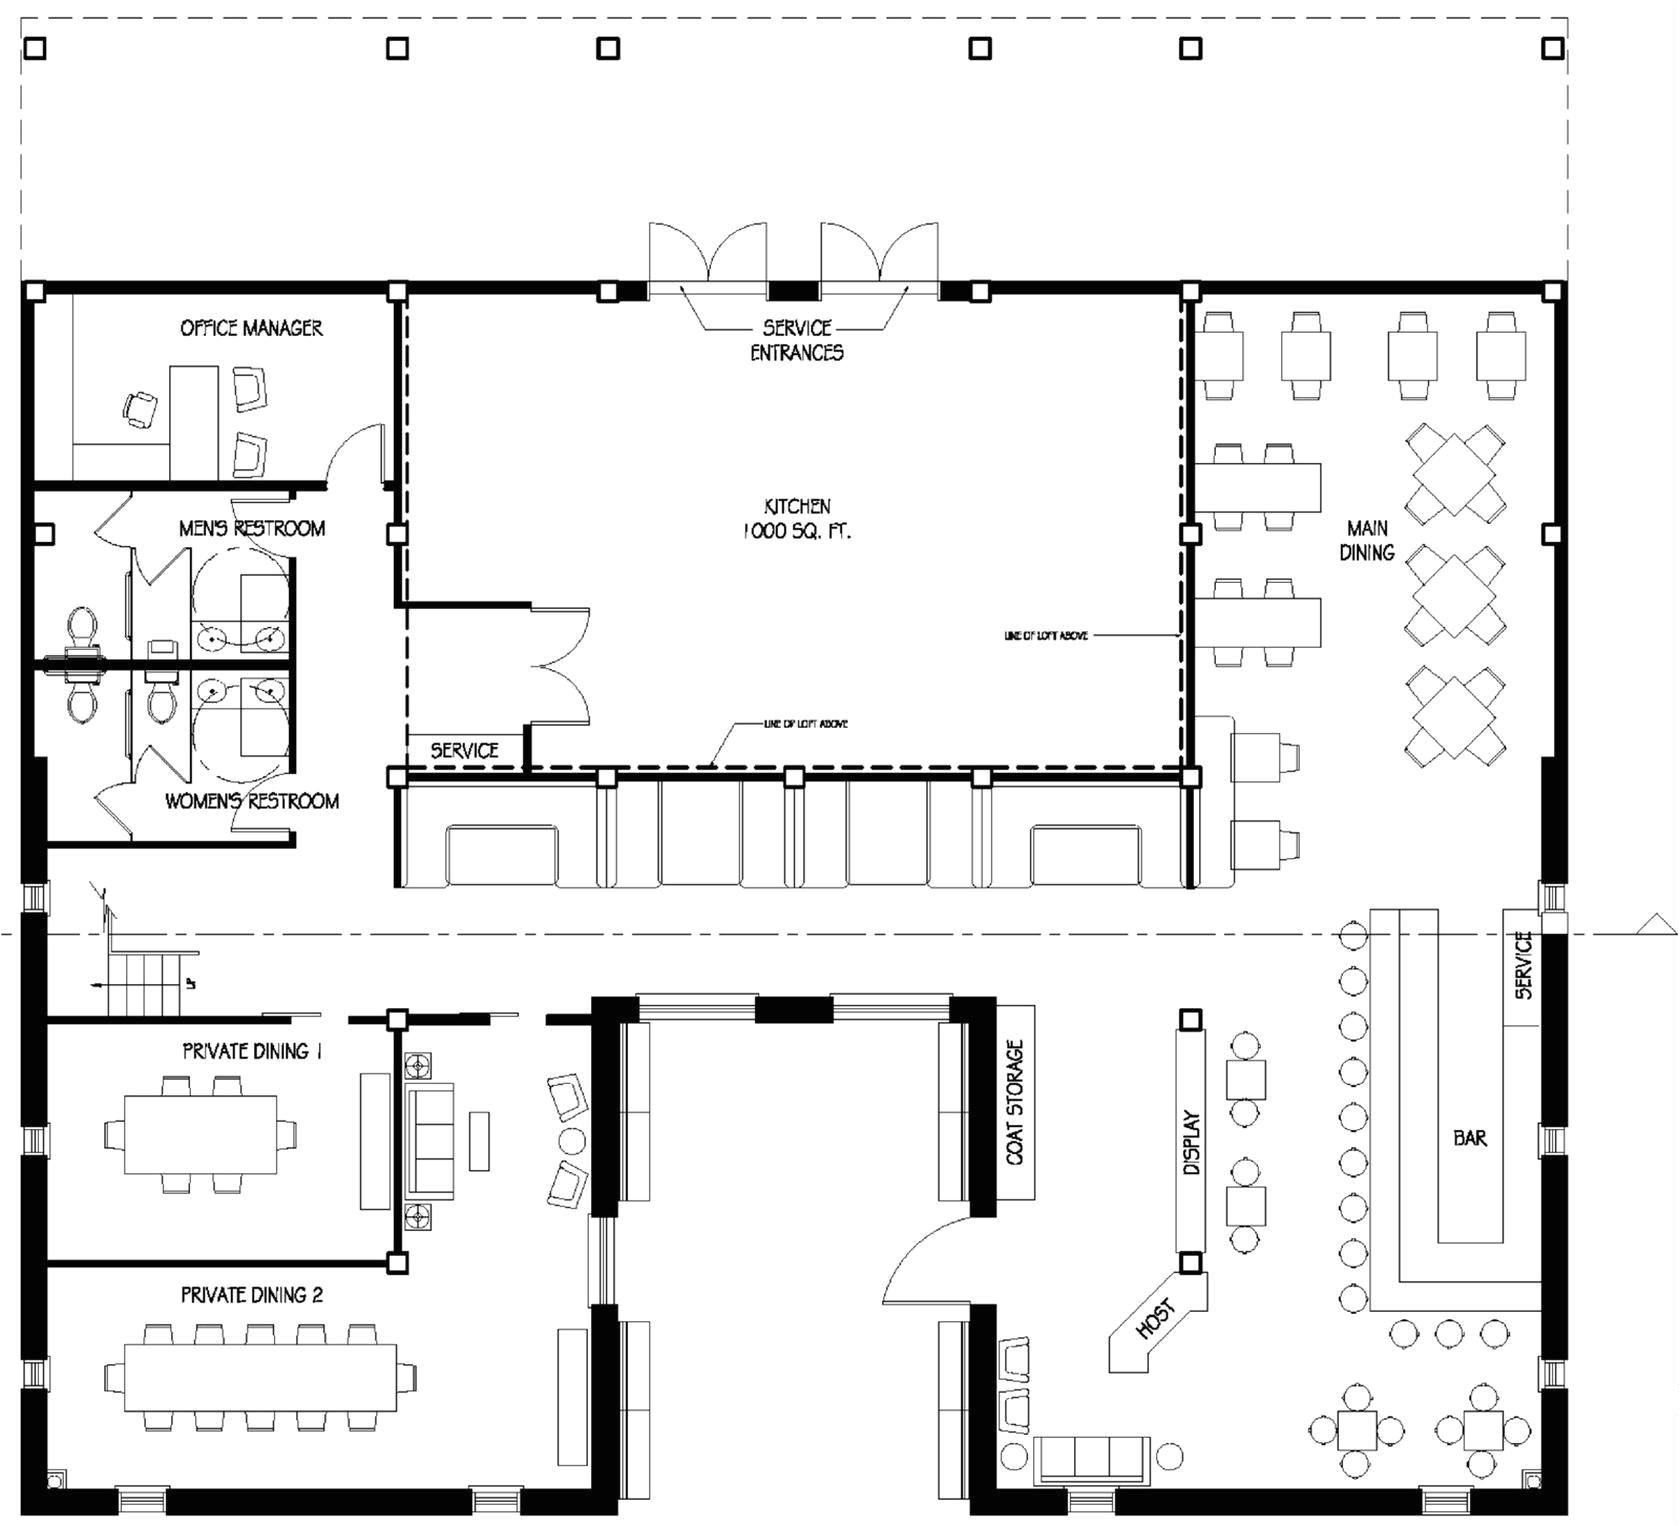 electrical floor plan awesome electrical floor plan lovely modern house design with floor plan in of